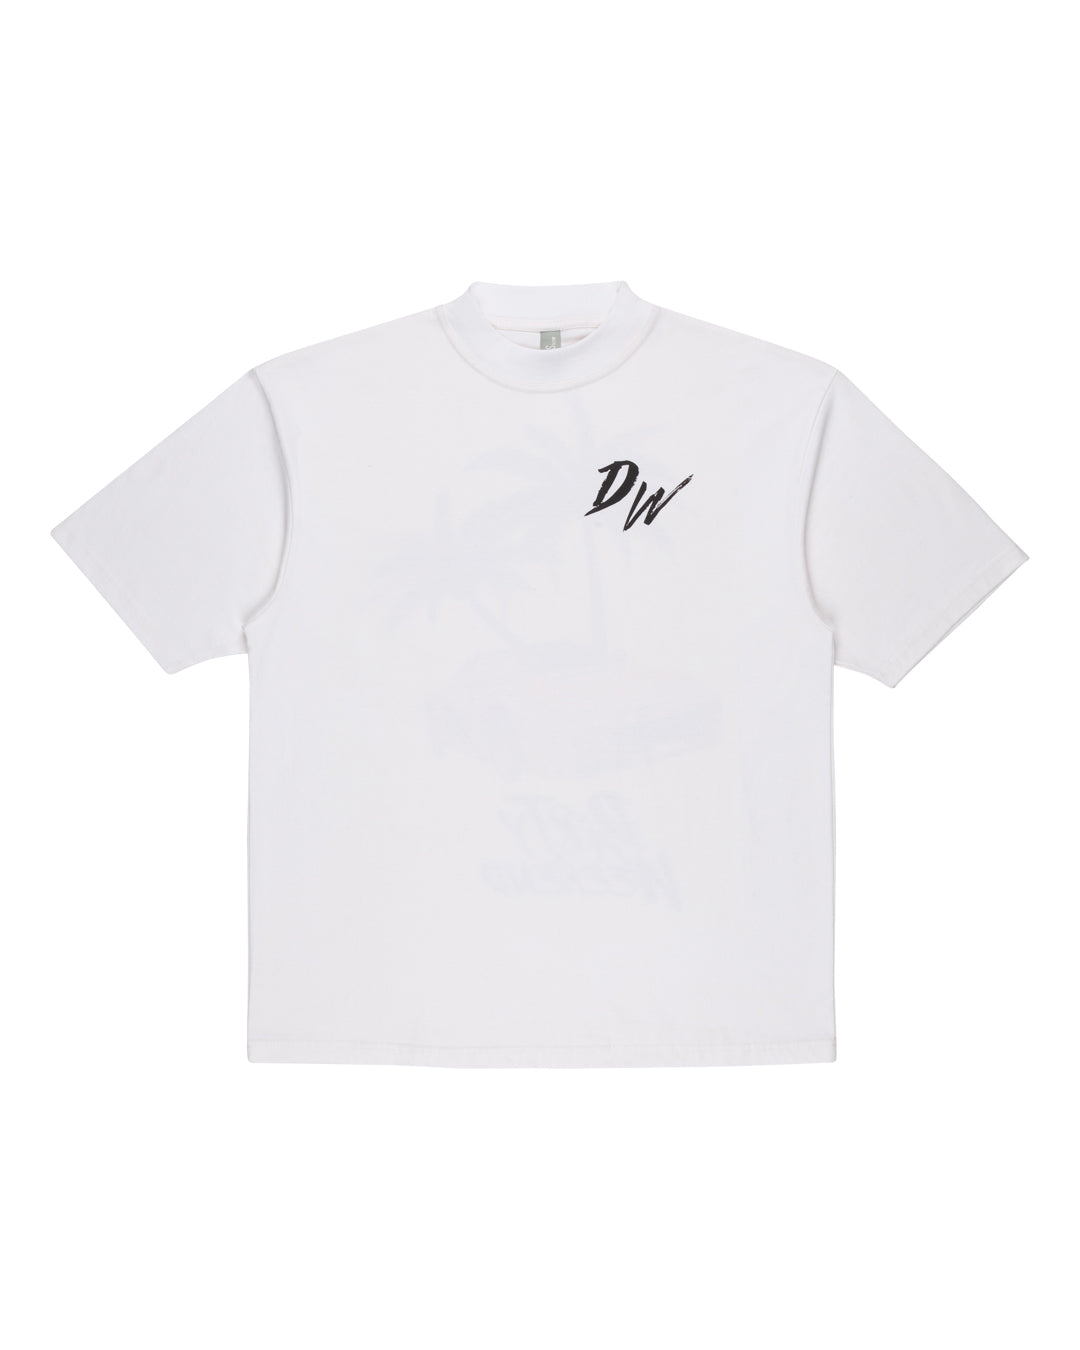 Dirty Weekend Oversized Fit T-Shirt in Black, White, Brown, and Vintage Gray